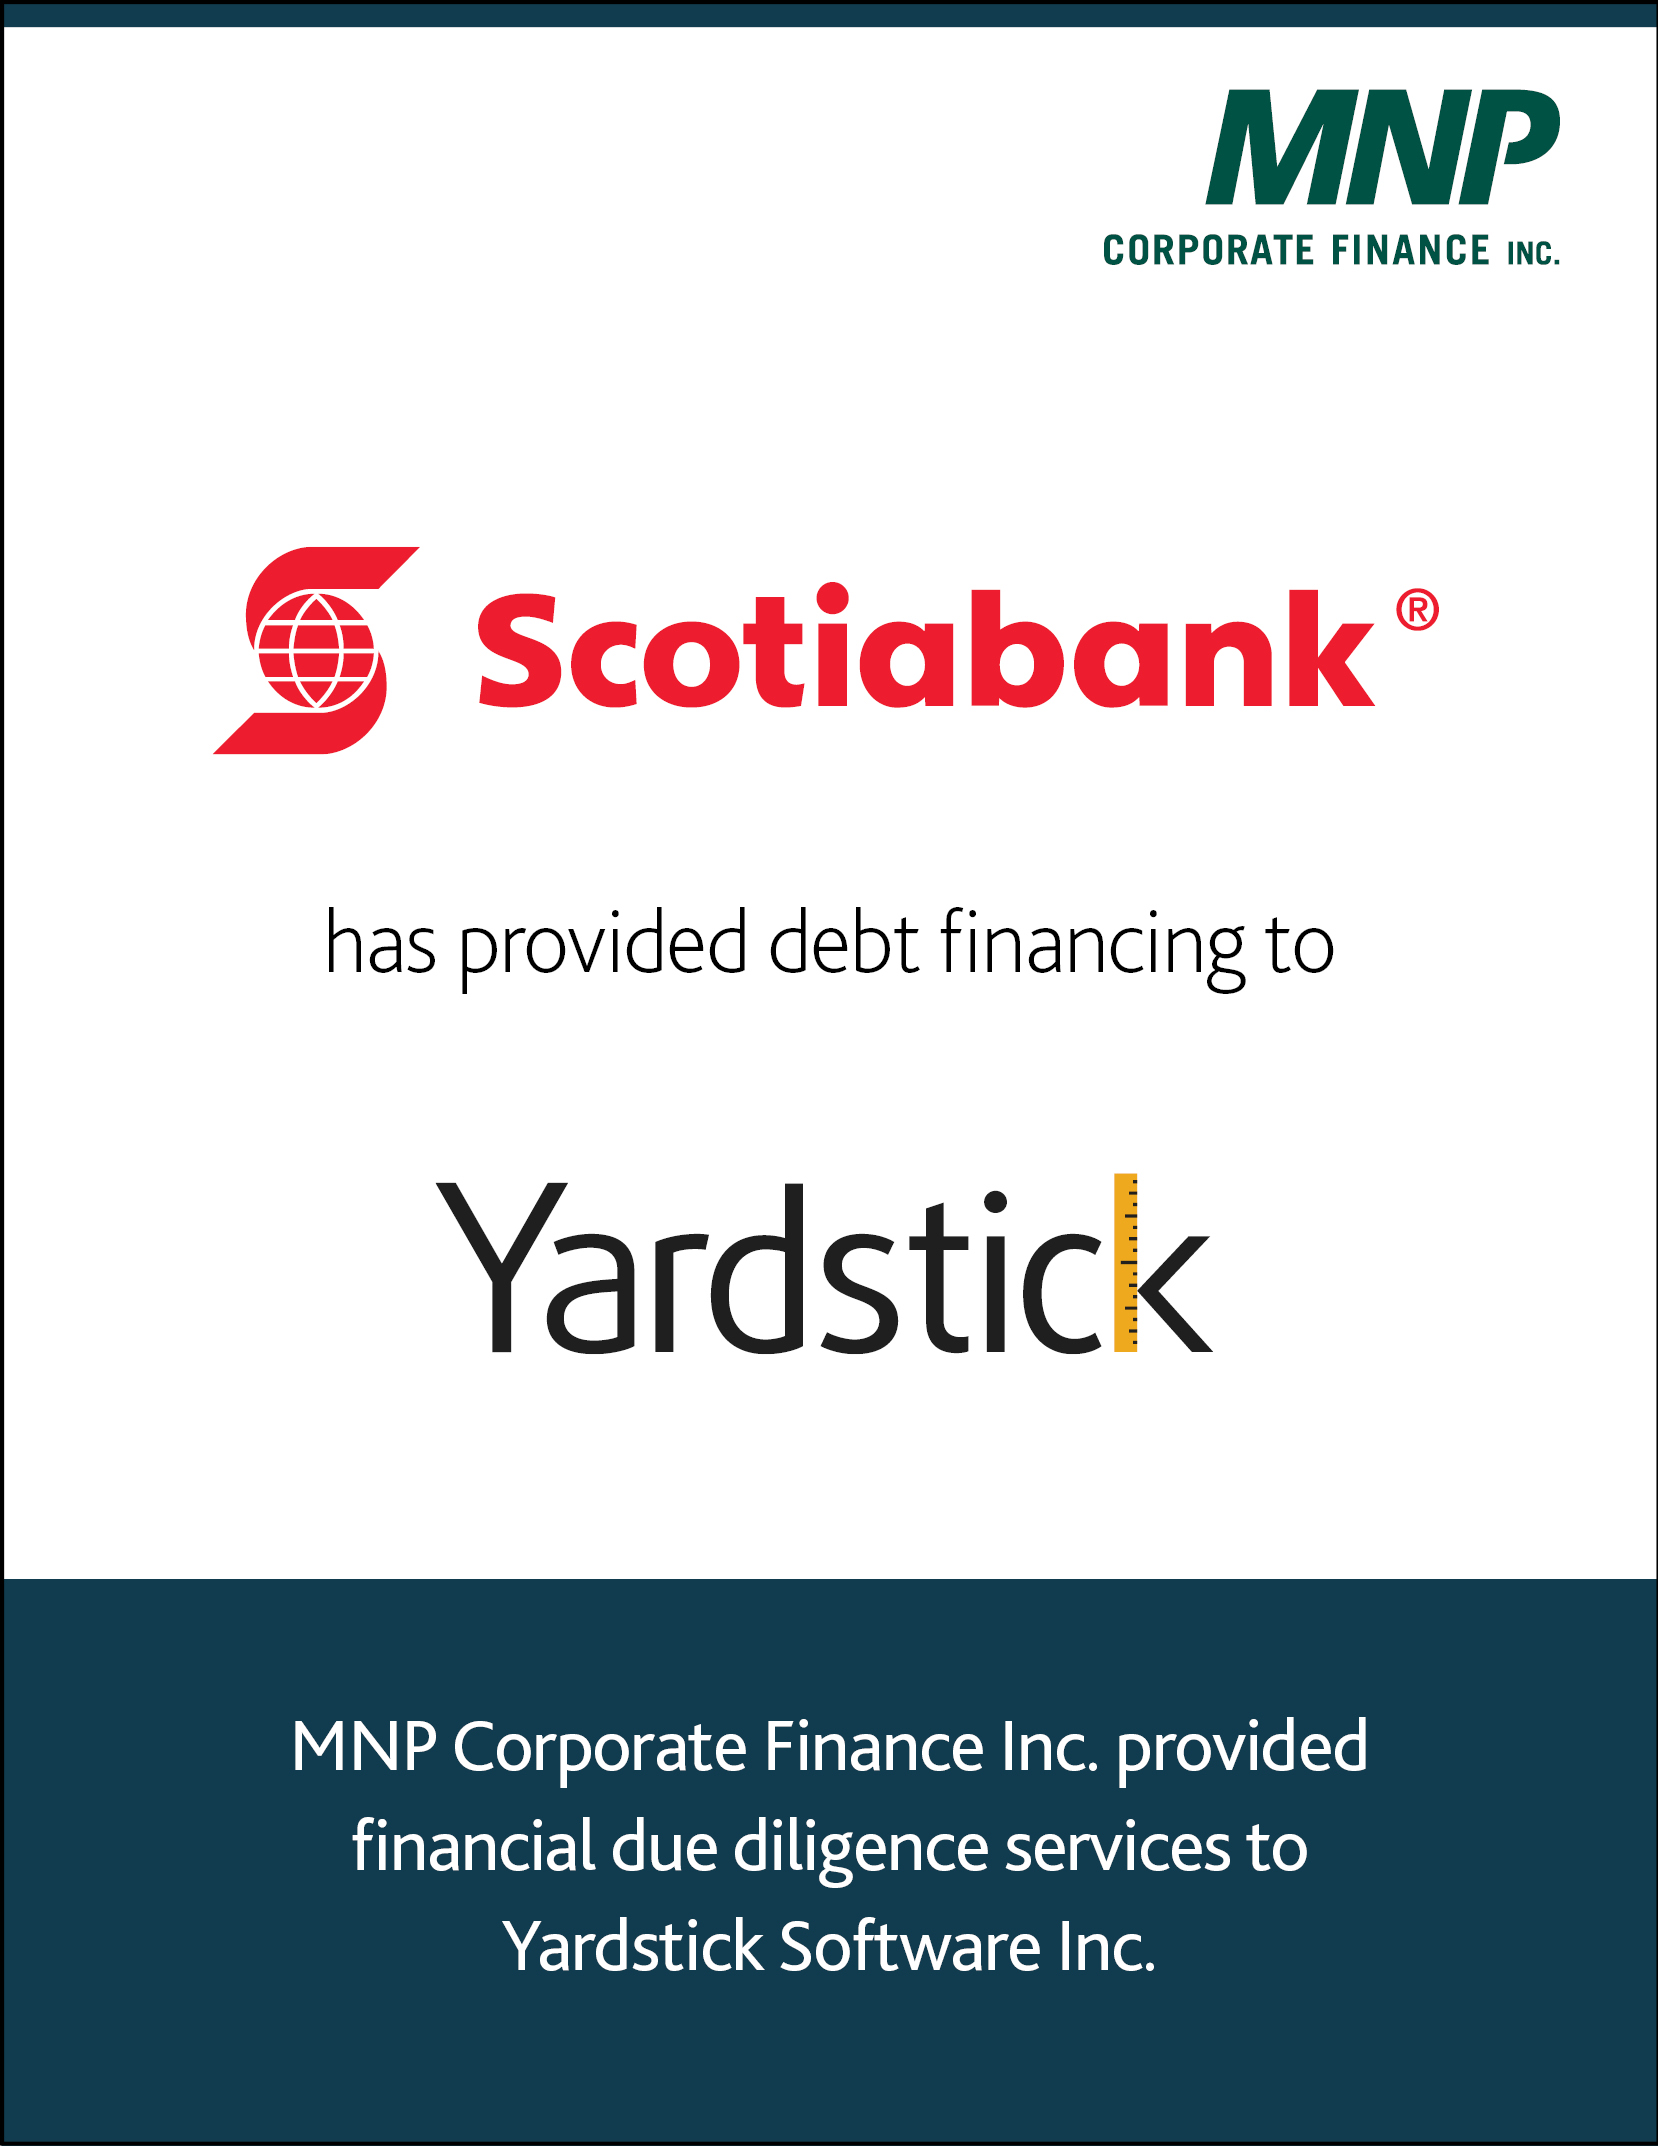 Scotiabank has provided debt financing to Yardstick Software Inc.